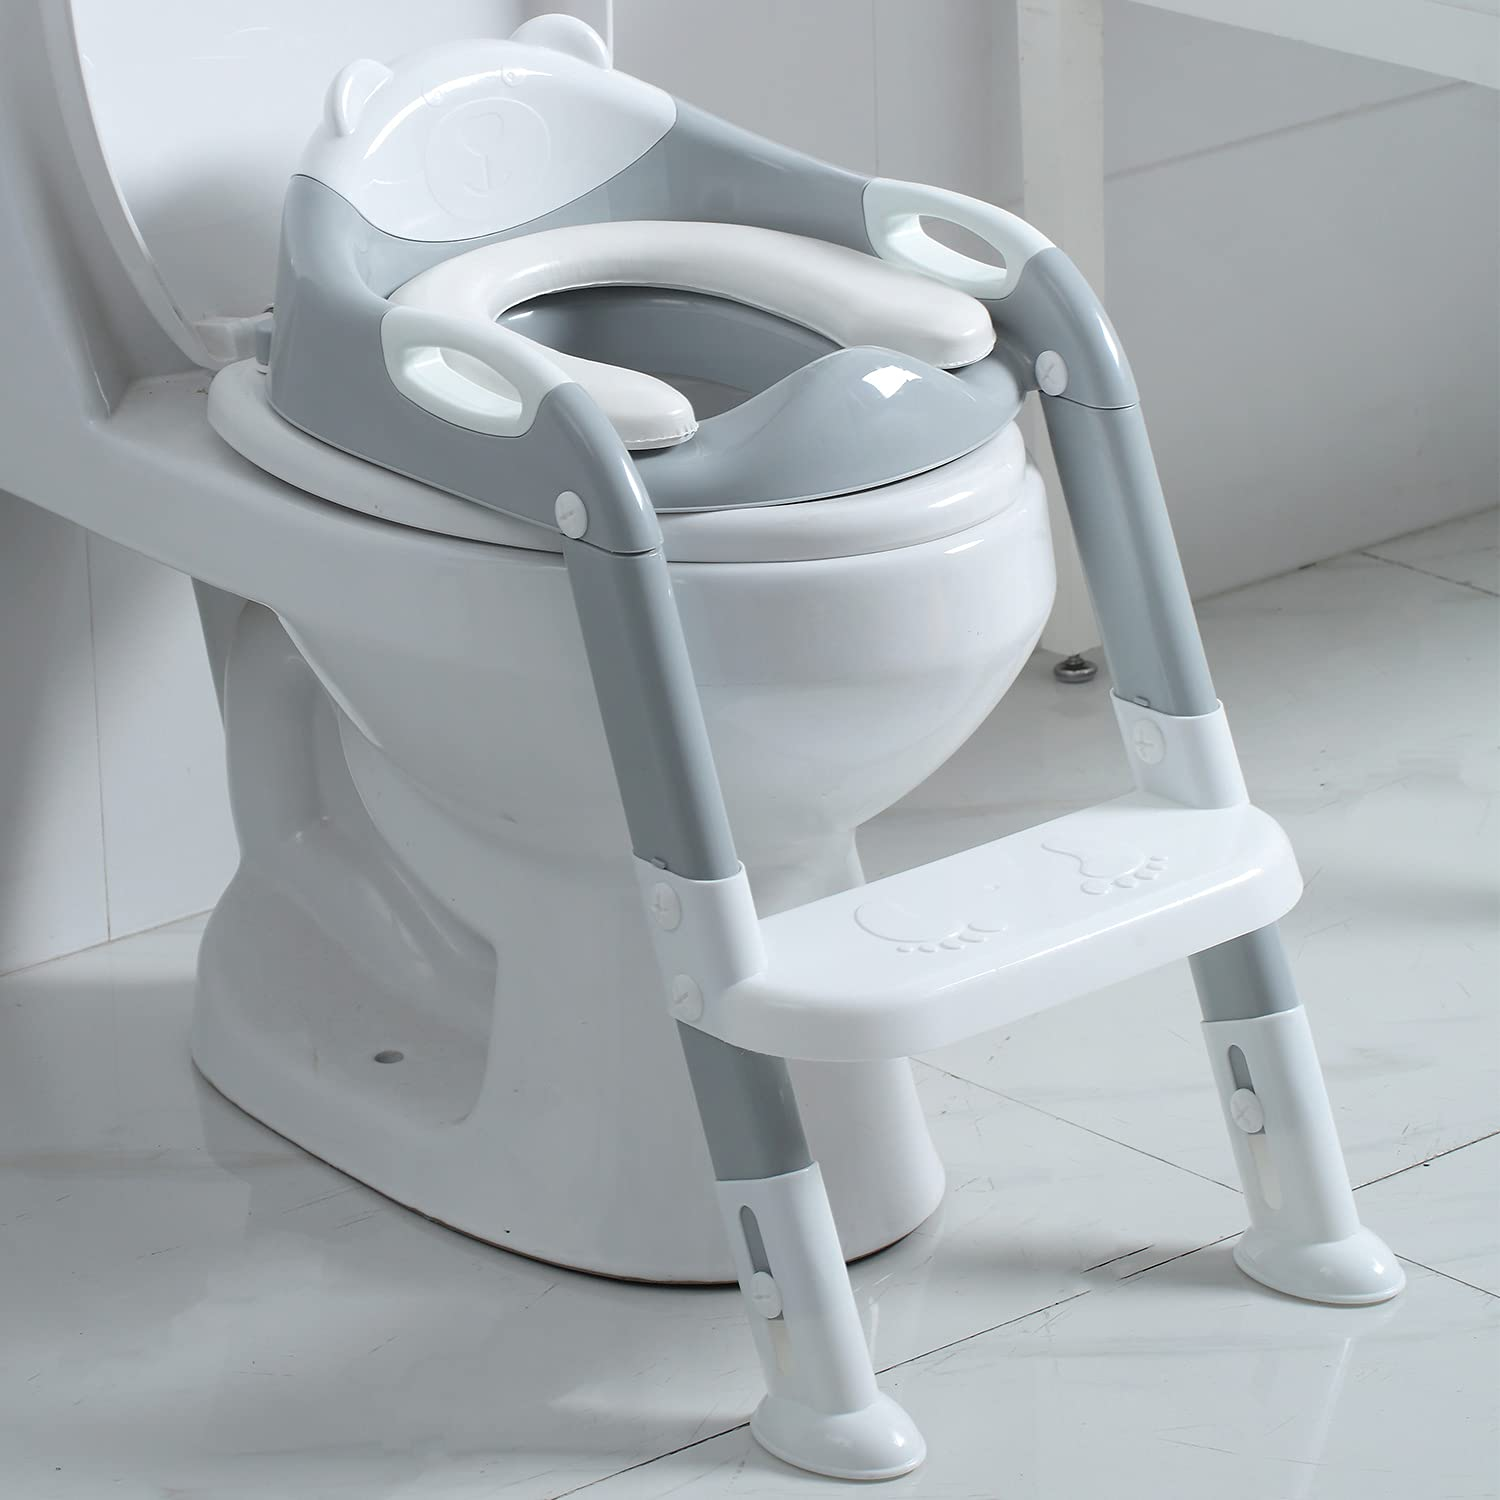 Kinder Climber ™ Kids' Climbable Potty Trainer (44%OFF ENDS TODAY)